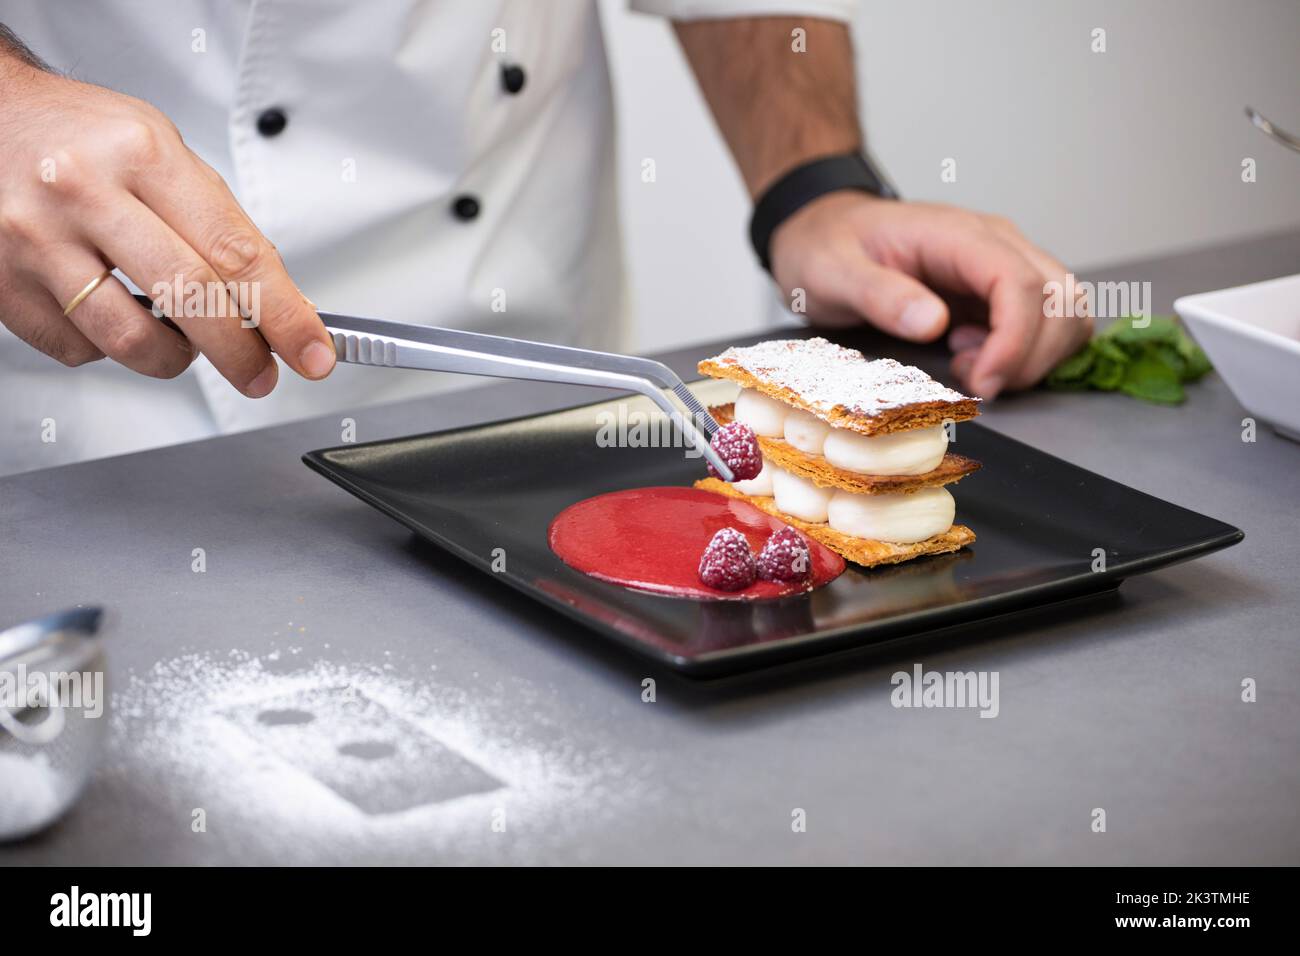 Crop focused man in white chef jacket decorating fancy dish with raspberry on plate Stock Photo